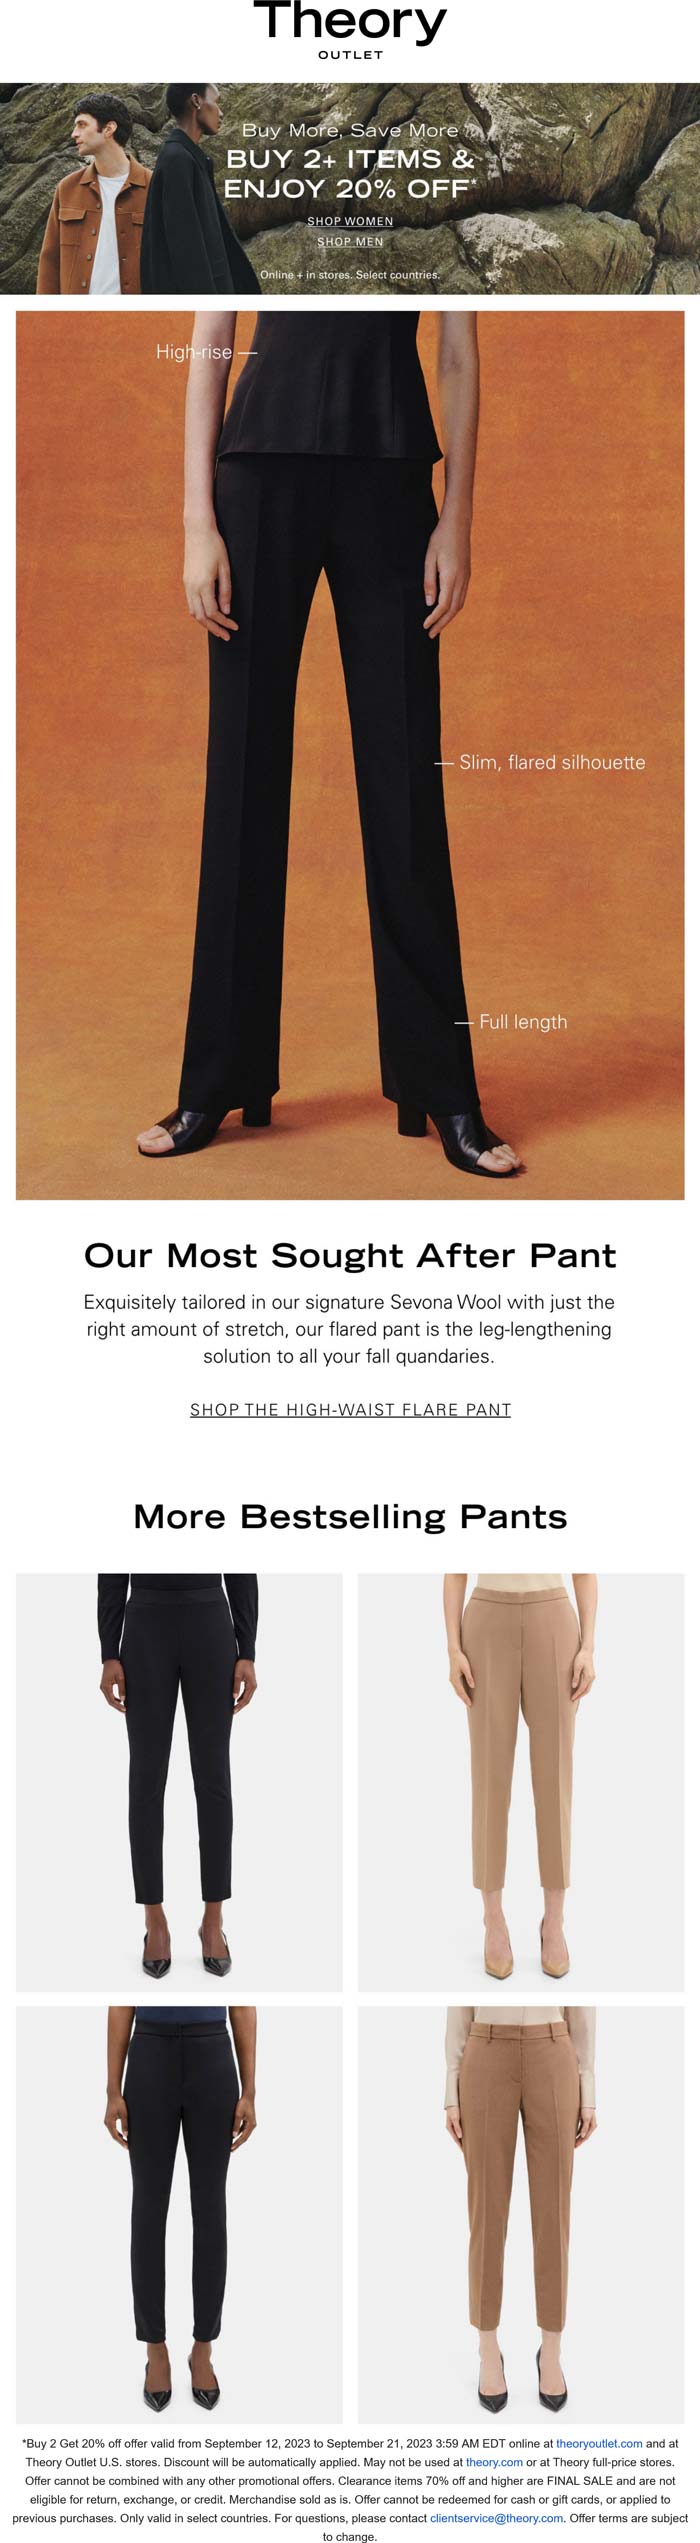 Theory Outlet stores Coupon  20% off 2+ pants at Theory Outlet, ditto online #theoryoutlet 